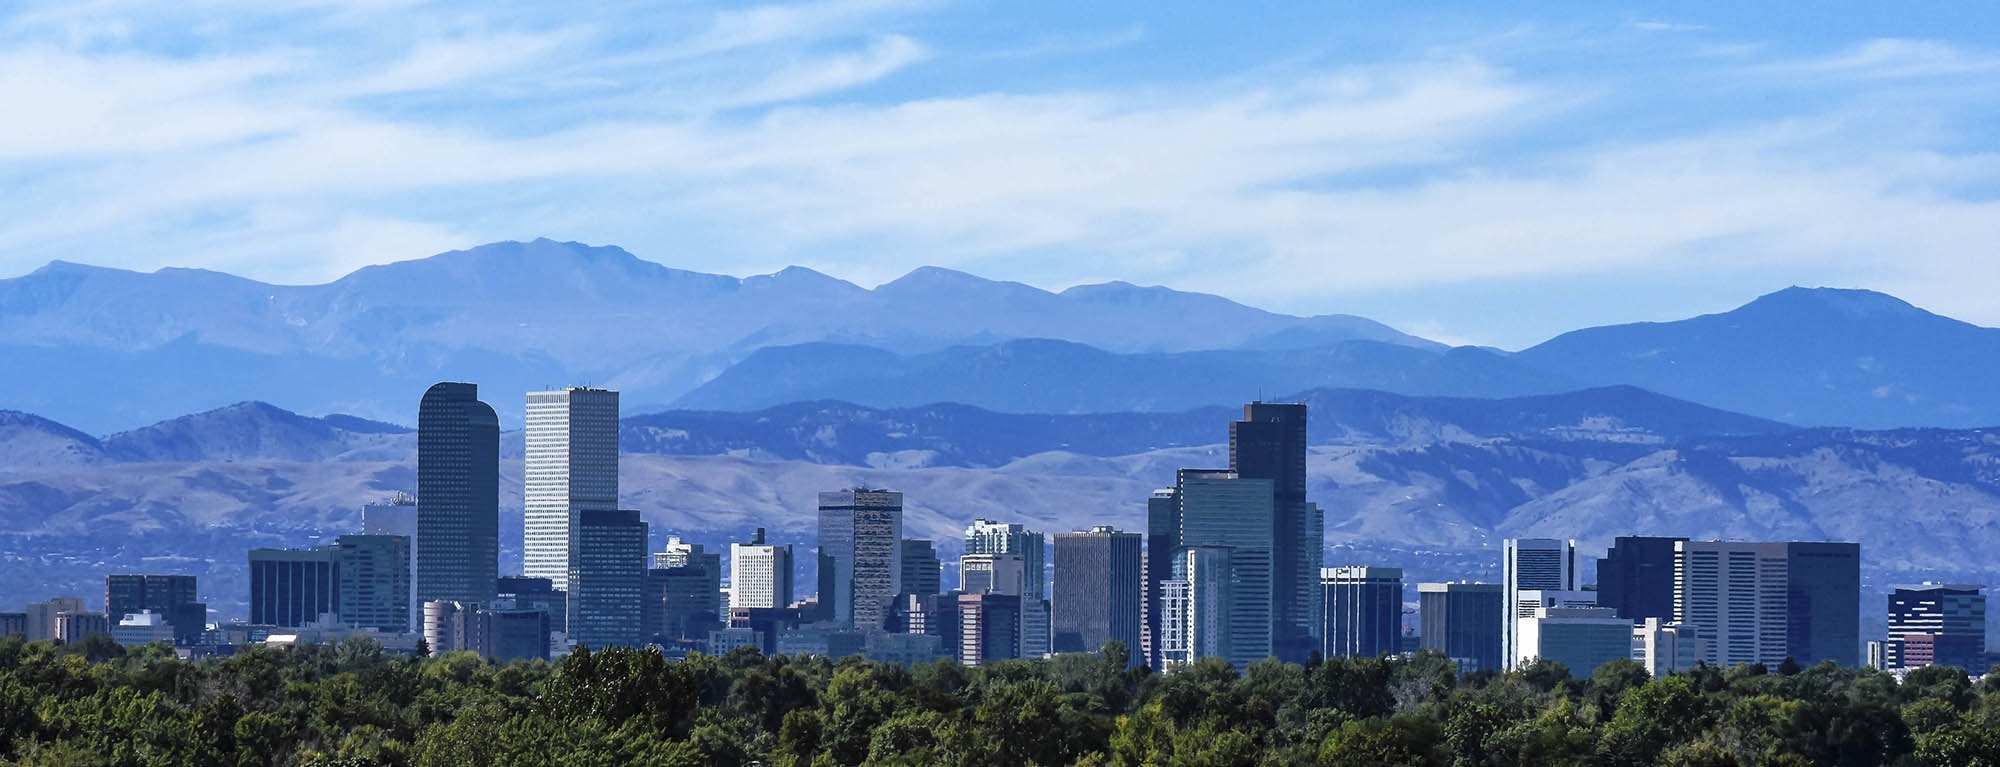 We Offer Our Services Throughout the Great State of Colorado